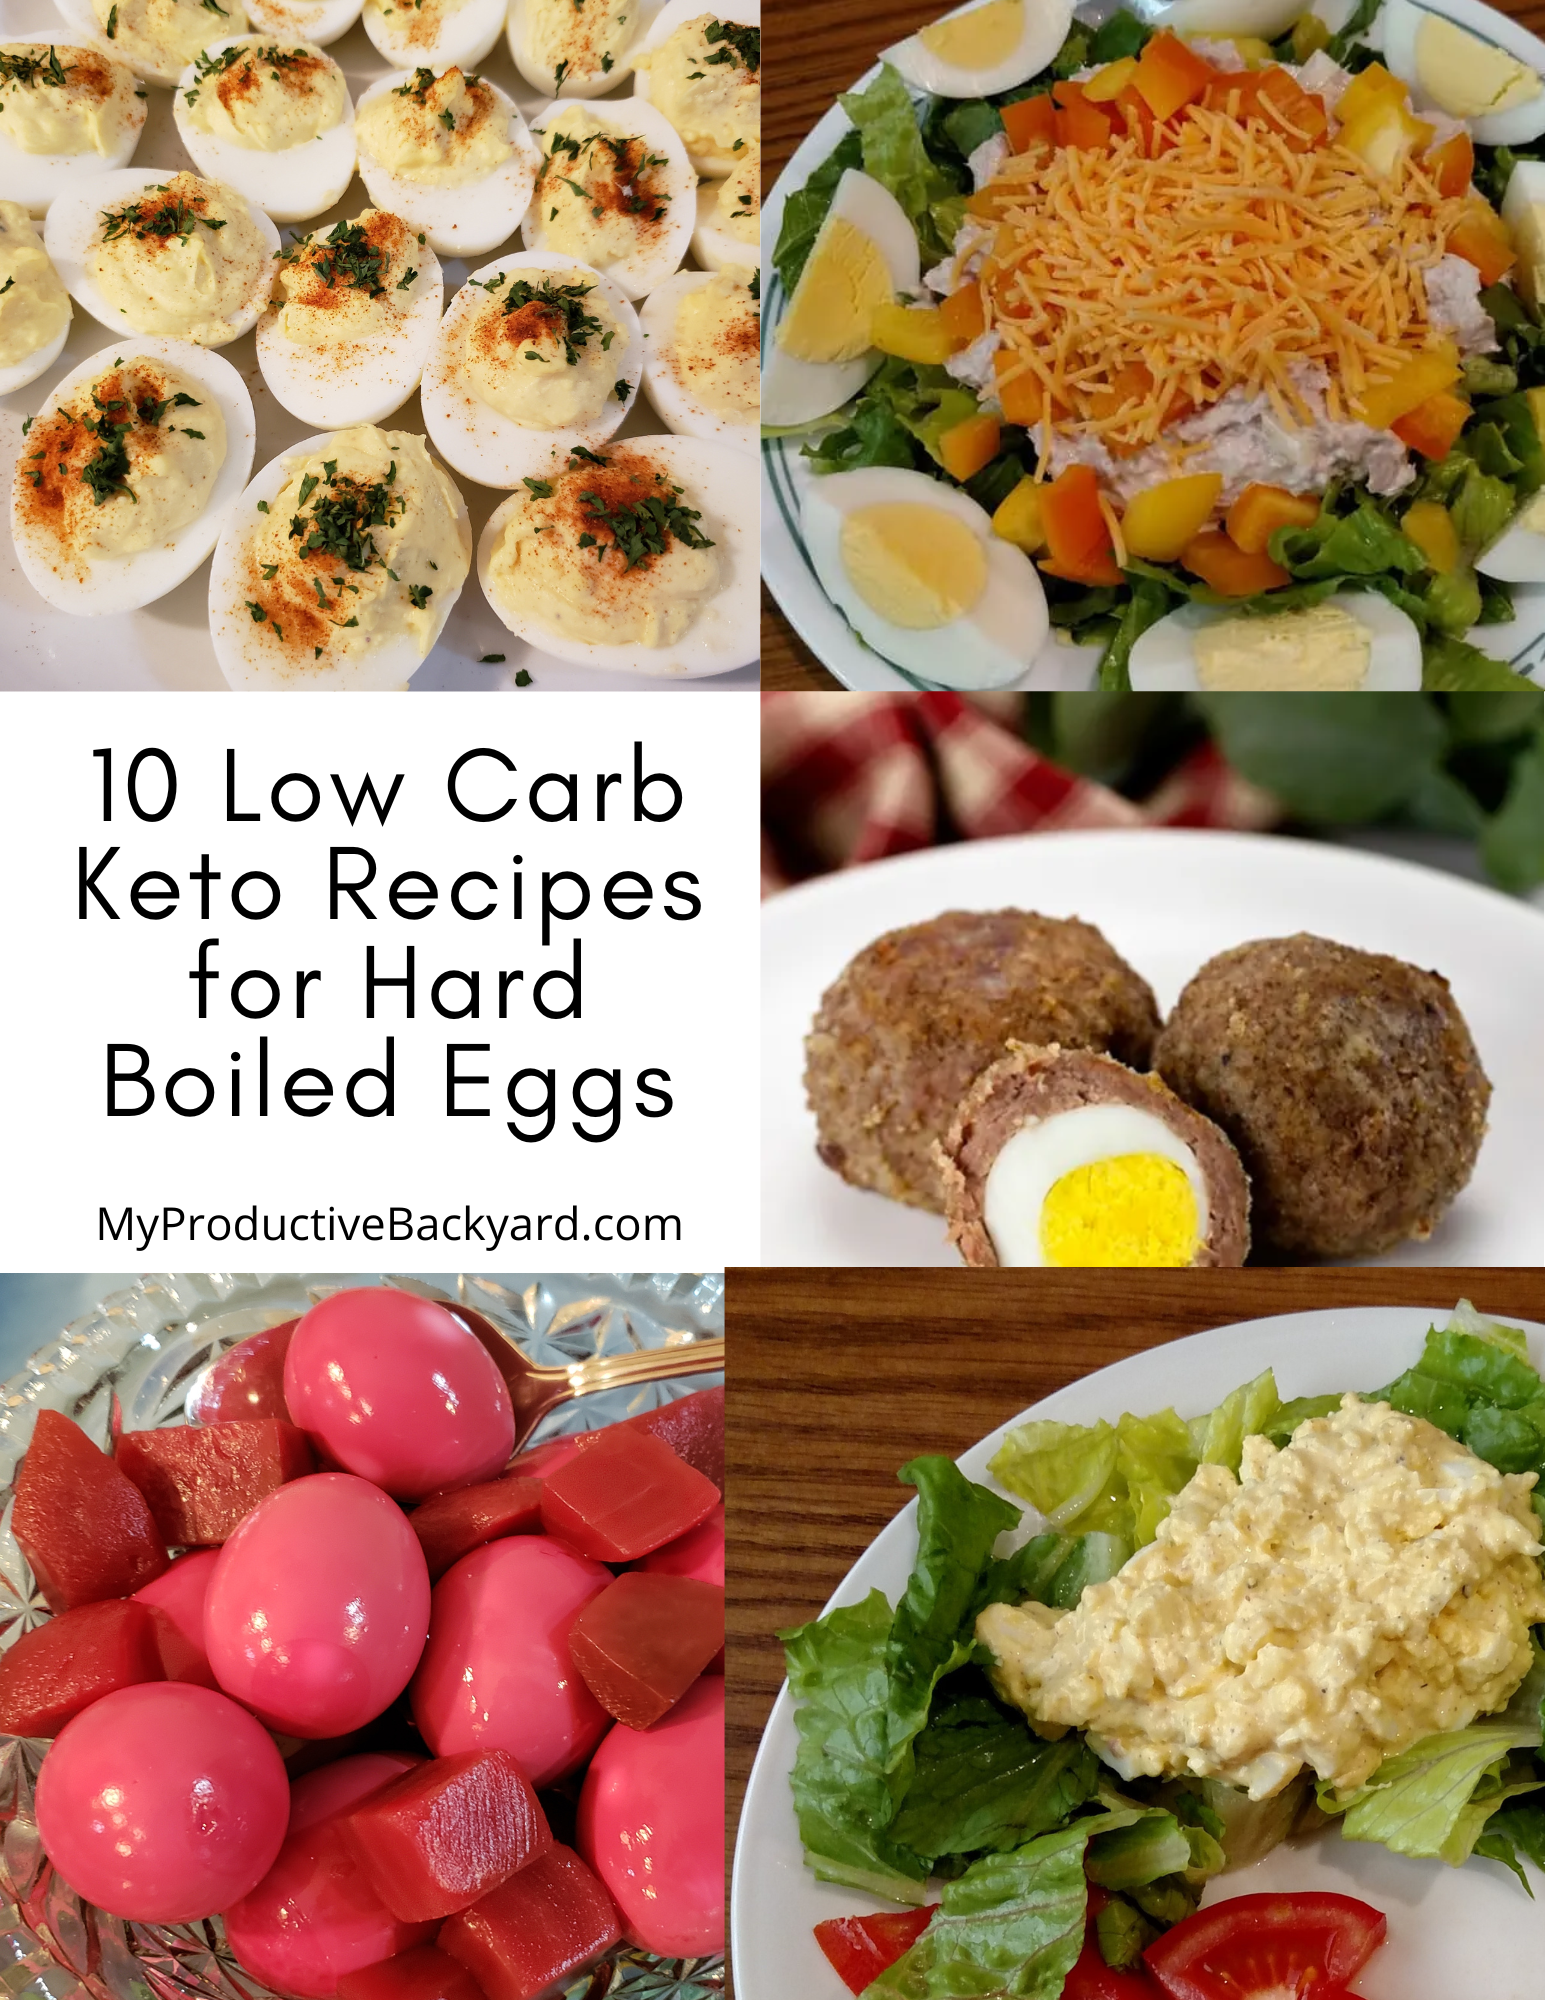 https://myproductivebackyard.com/wp-content/uploads/2019/04/10-Low-Carb-Keto-Recipes-for-Hard-Boiled-Eggs-Pinterest-Pin.png